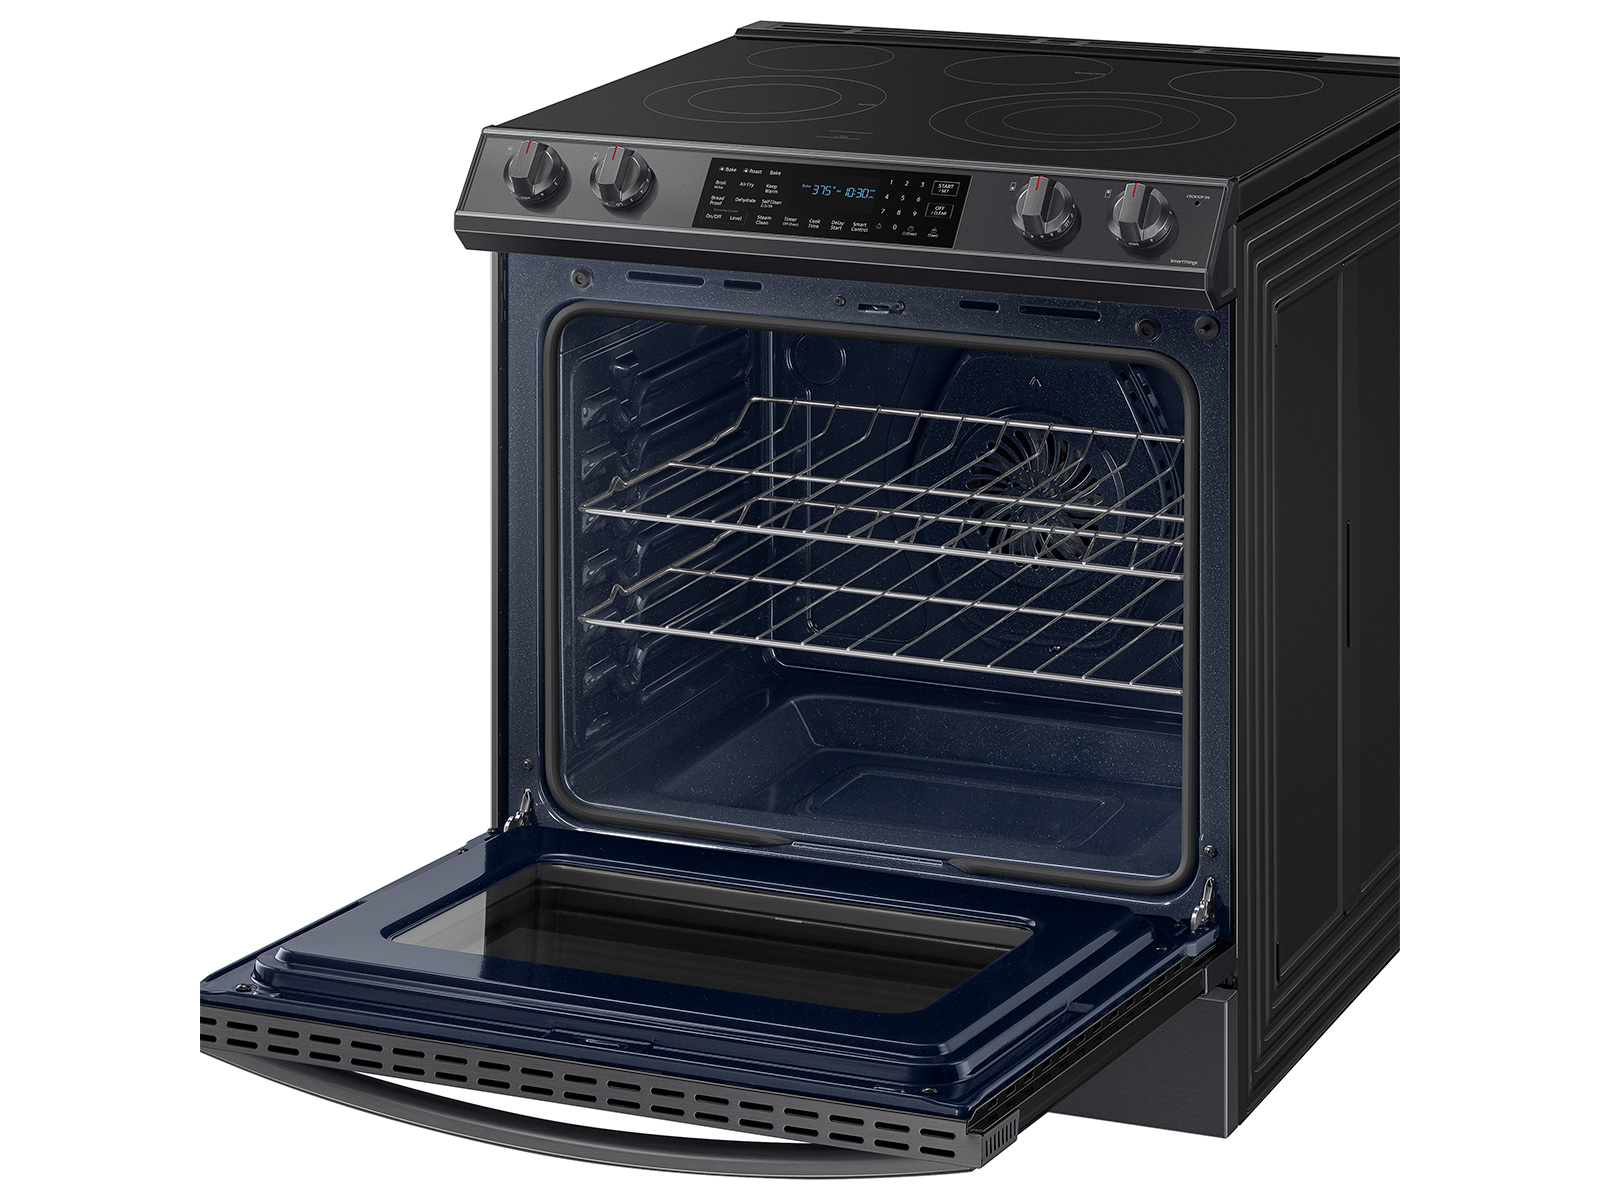 Thumbnail image of 6.3 cu. ft. Smart Slide-in Electric Range with Air Fry in Black Stainless Steel